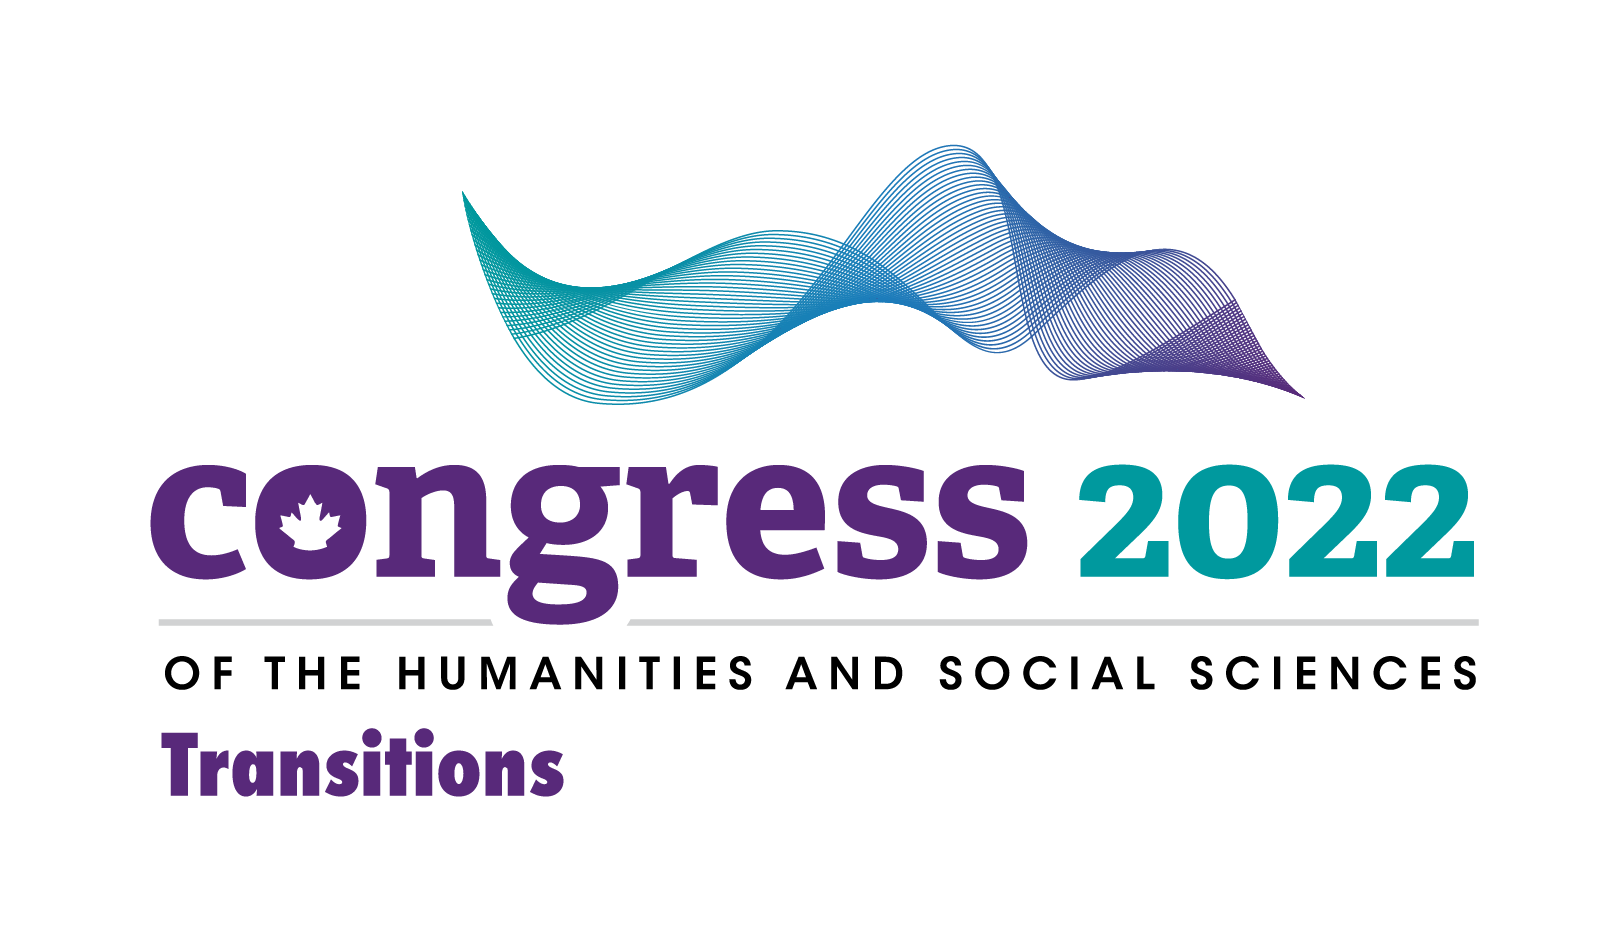 A teal, blue and purple wave pattern make up the Congress 2022 logo, with English text reading “Congress 2022 of the Humanities and Social Sciences”. The theme name reading “Transitions” sits at the bottom of the logo.